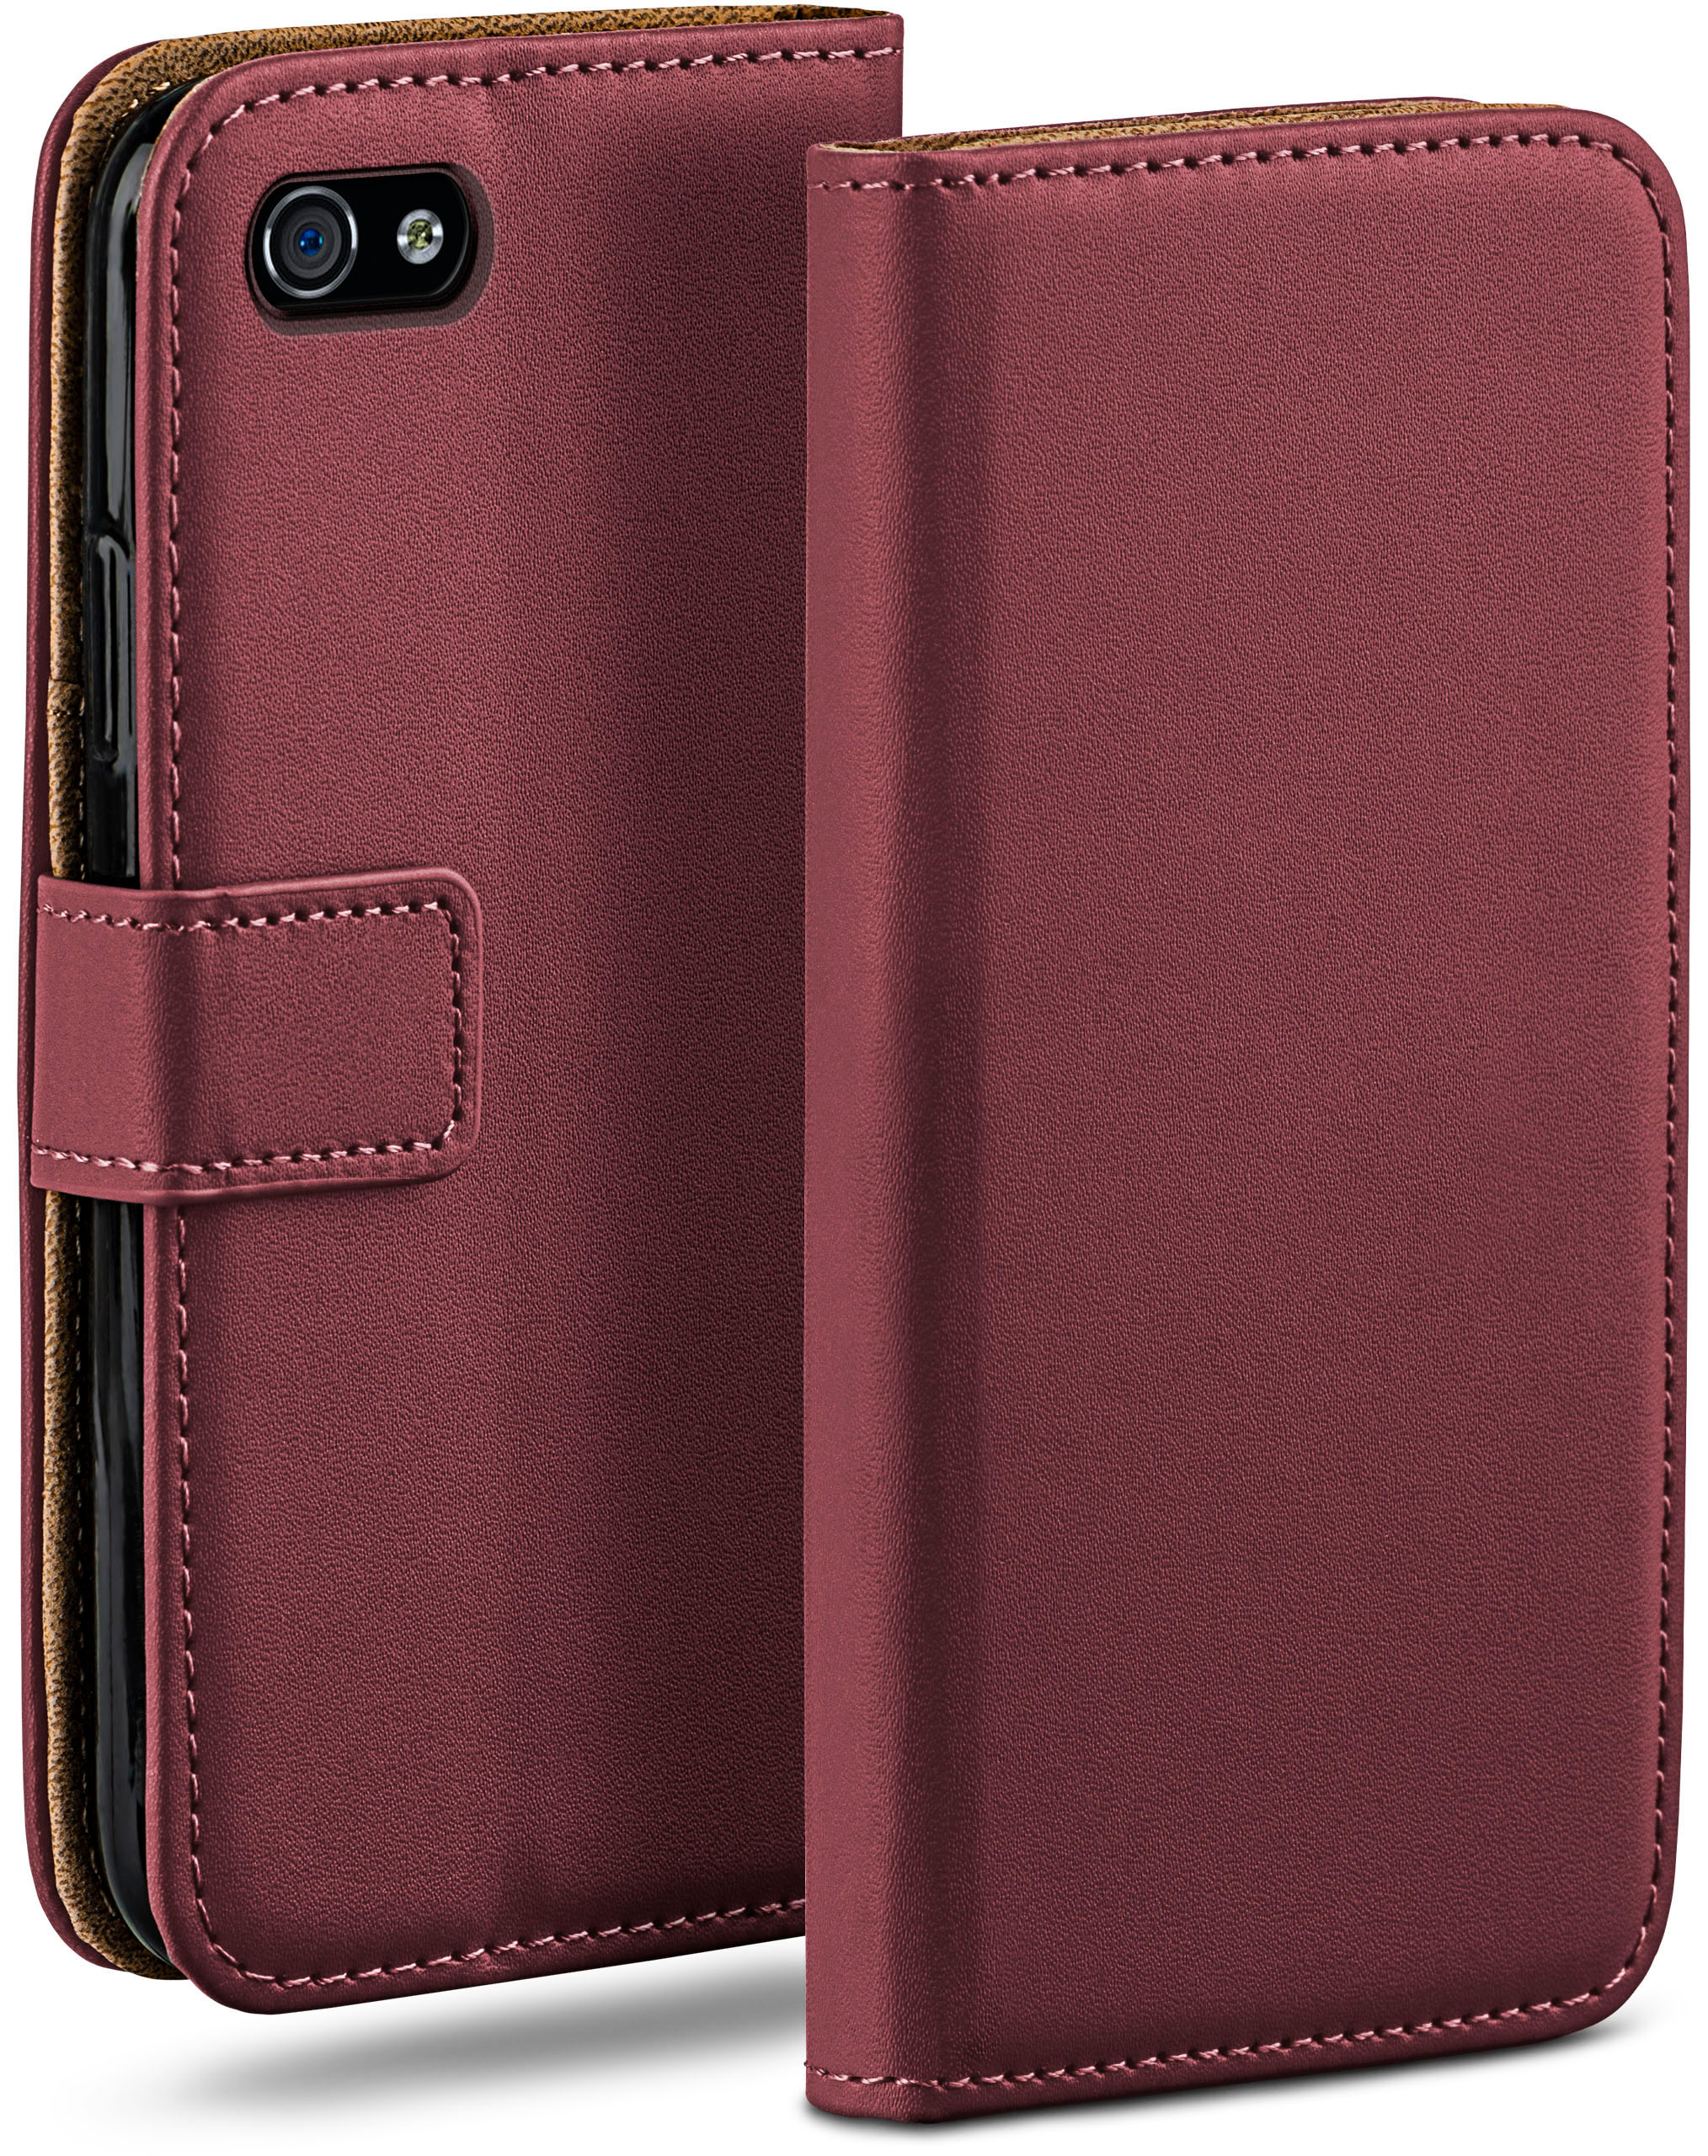 Bookcover, Case, 4s MOEX Book 4, / Maroon-Red iPhone Apple, iPhone